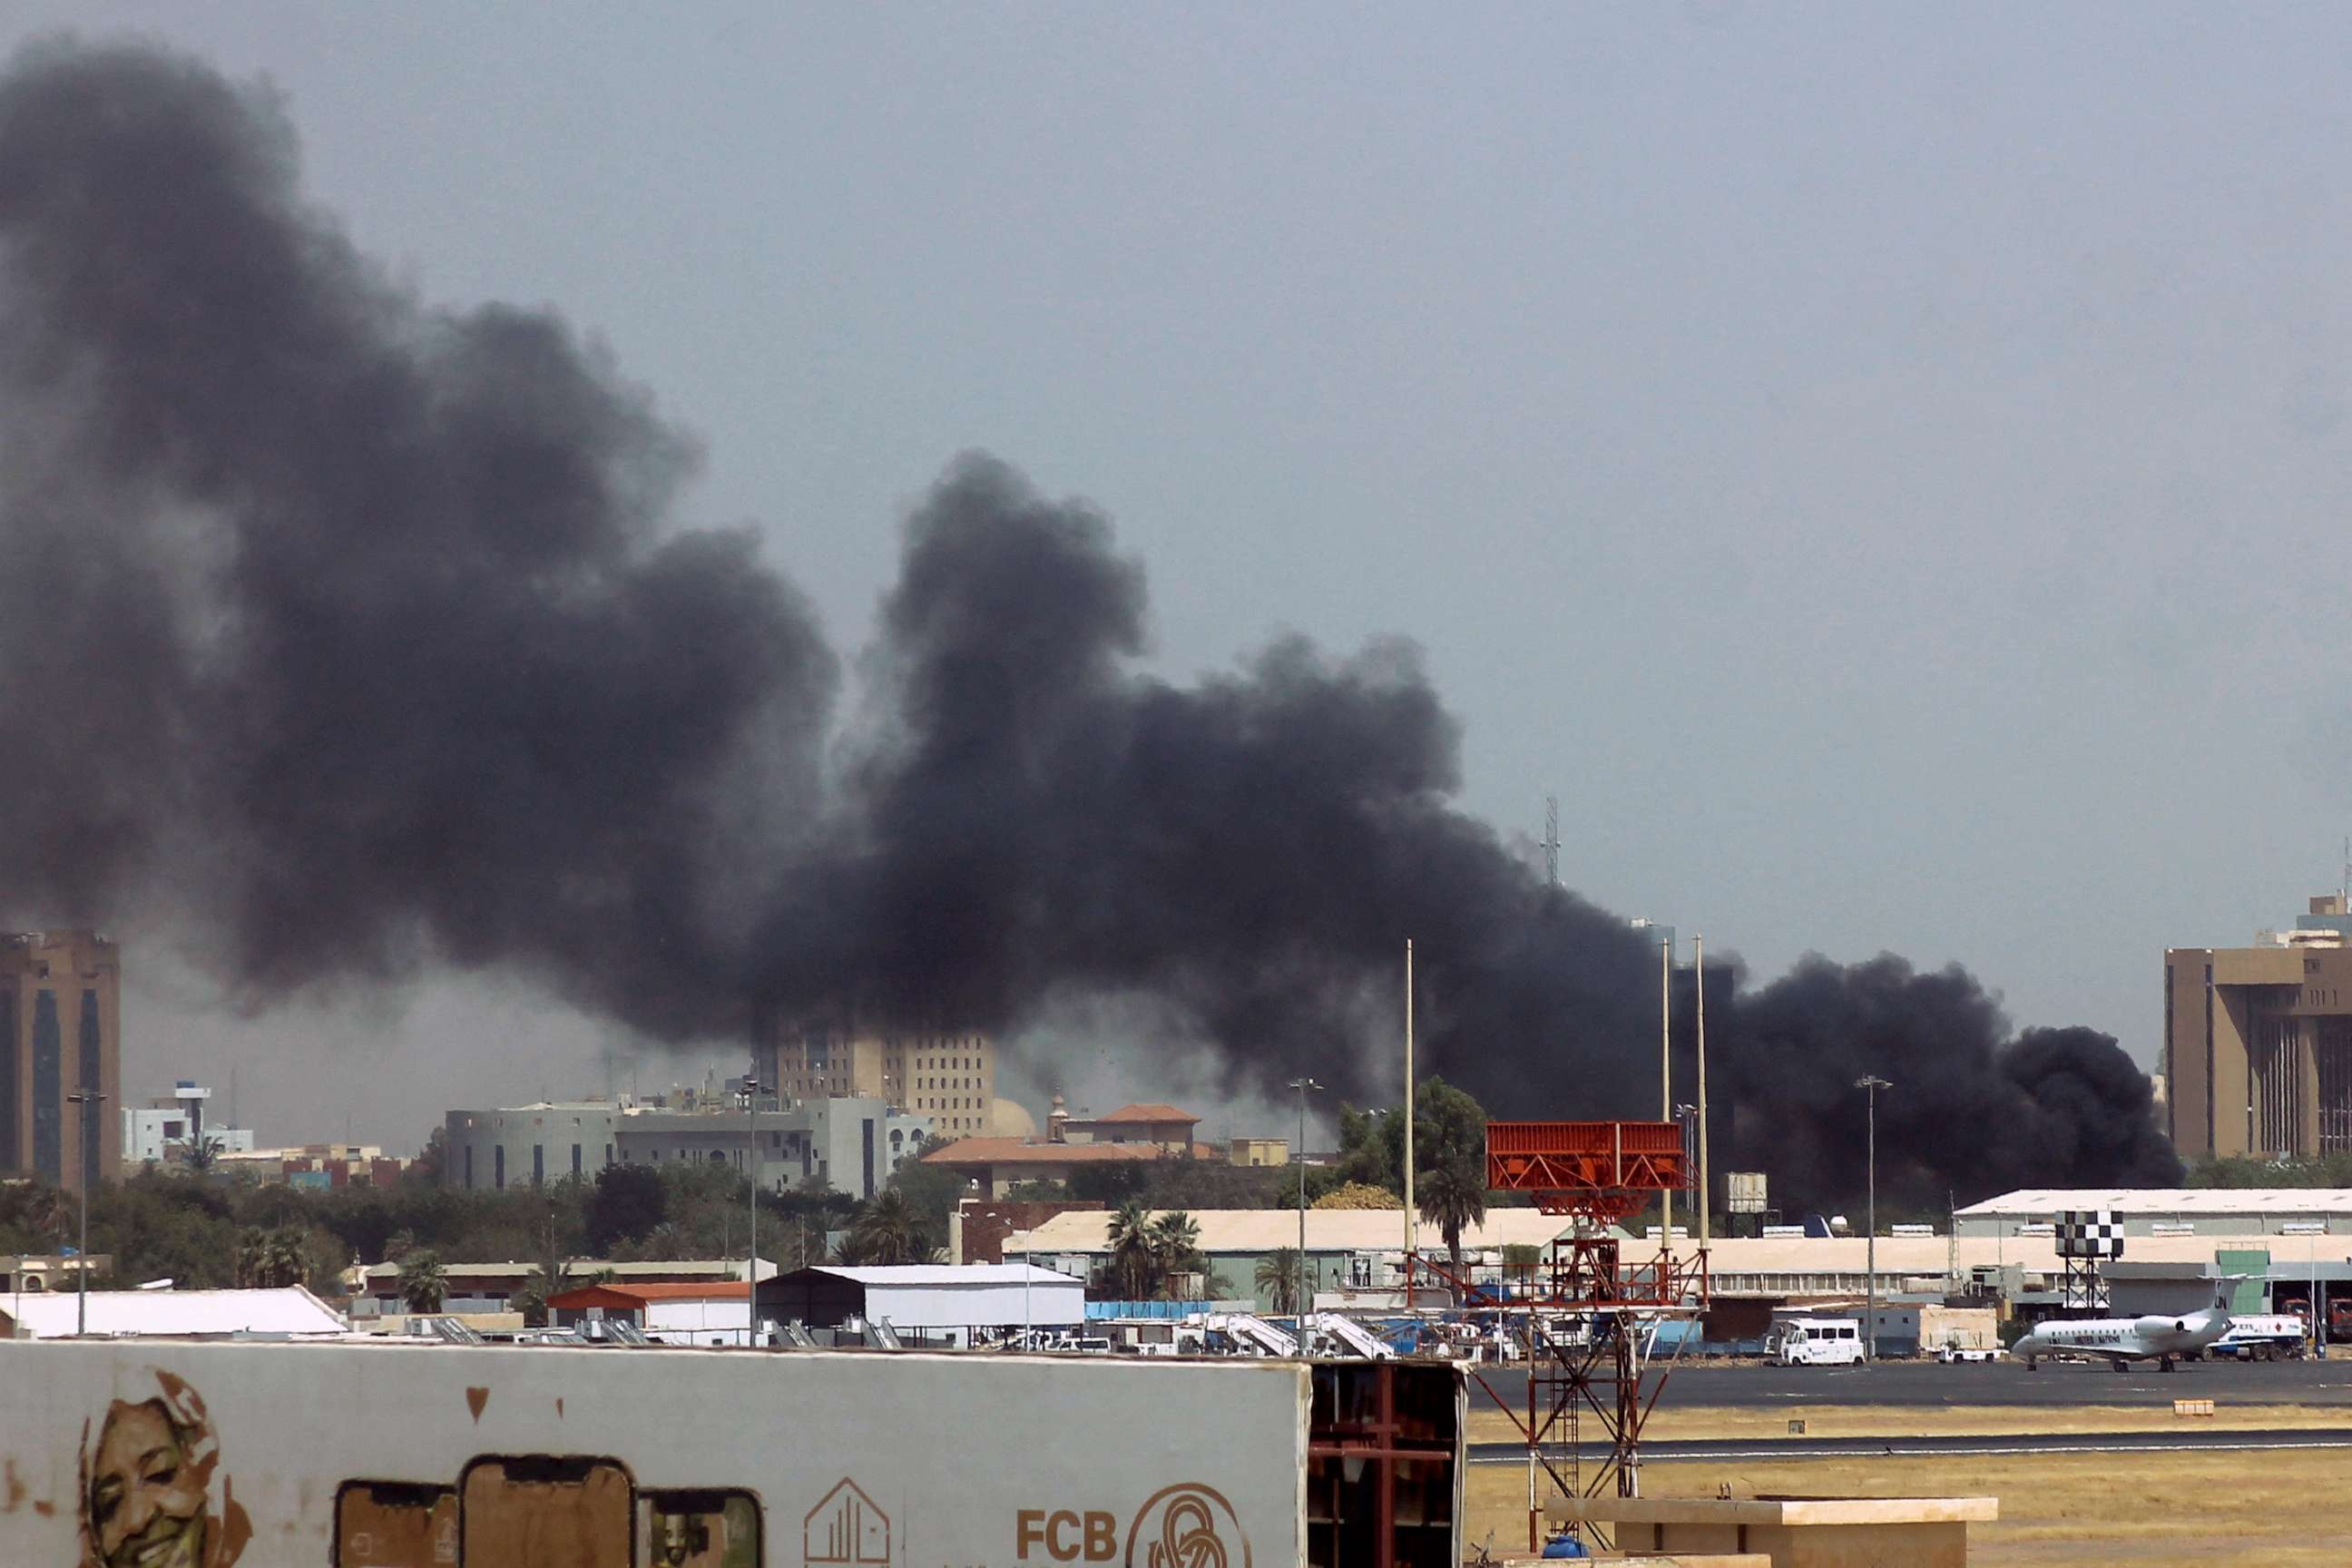 PHOTO: Heavy smoke bellows above buildings in the vicinity of the Khartoum's airport on April 15, 2023, amid clashes in the Sudanese capital.